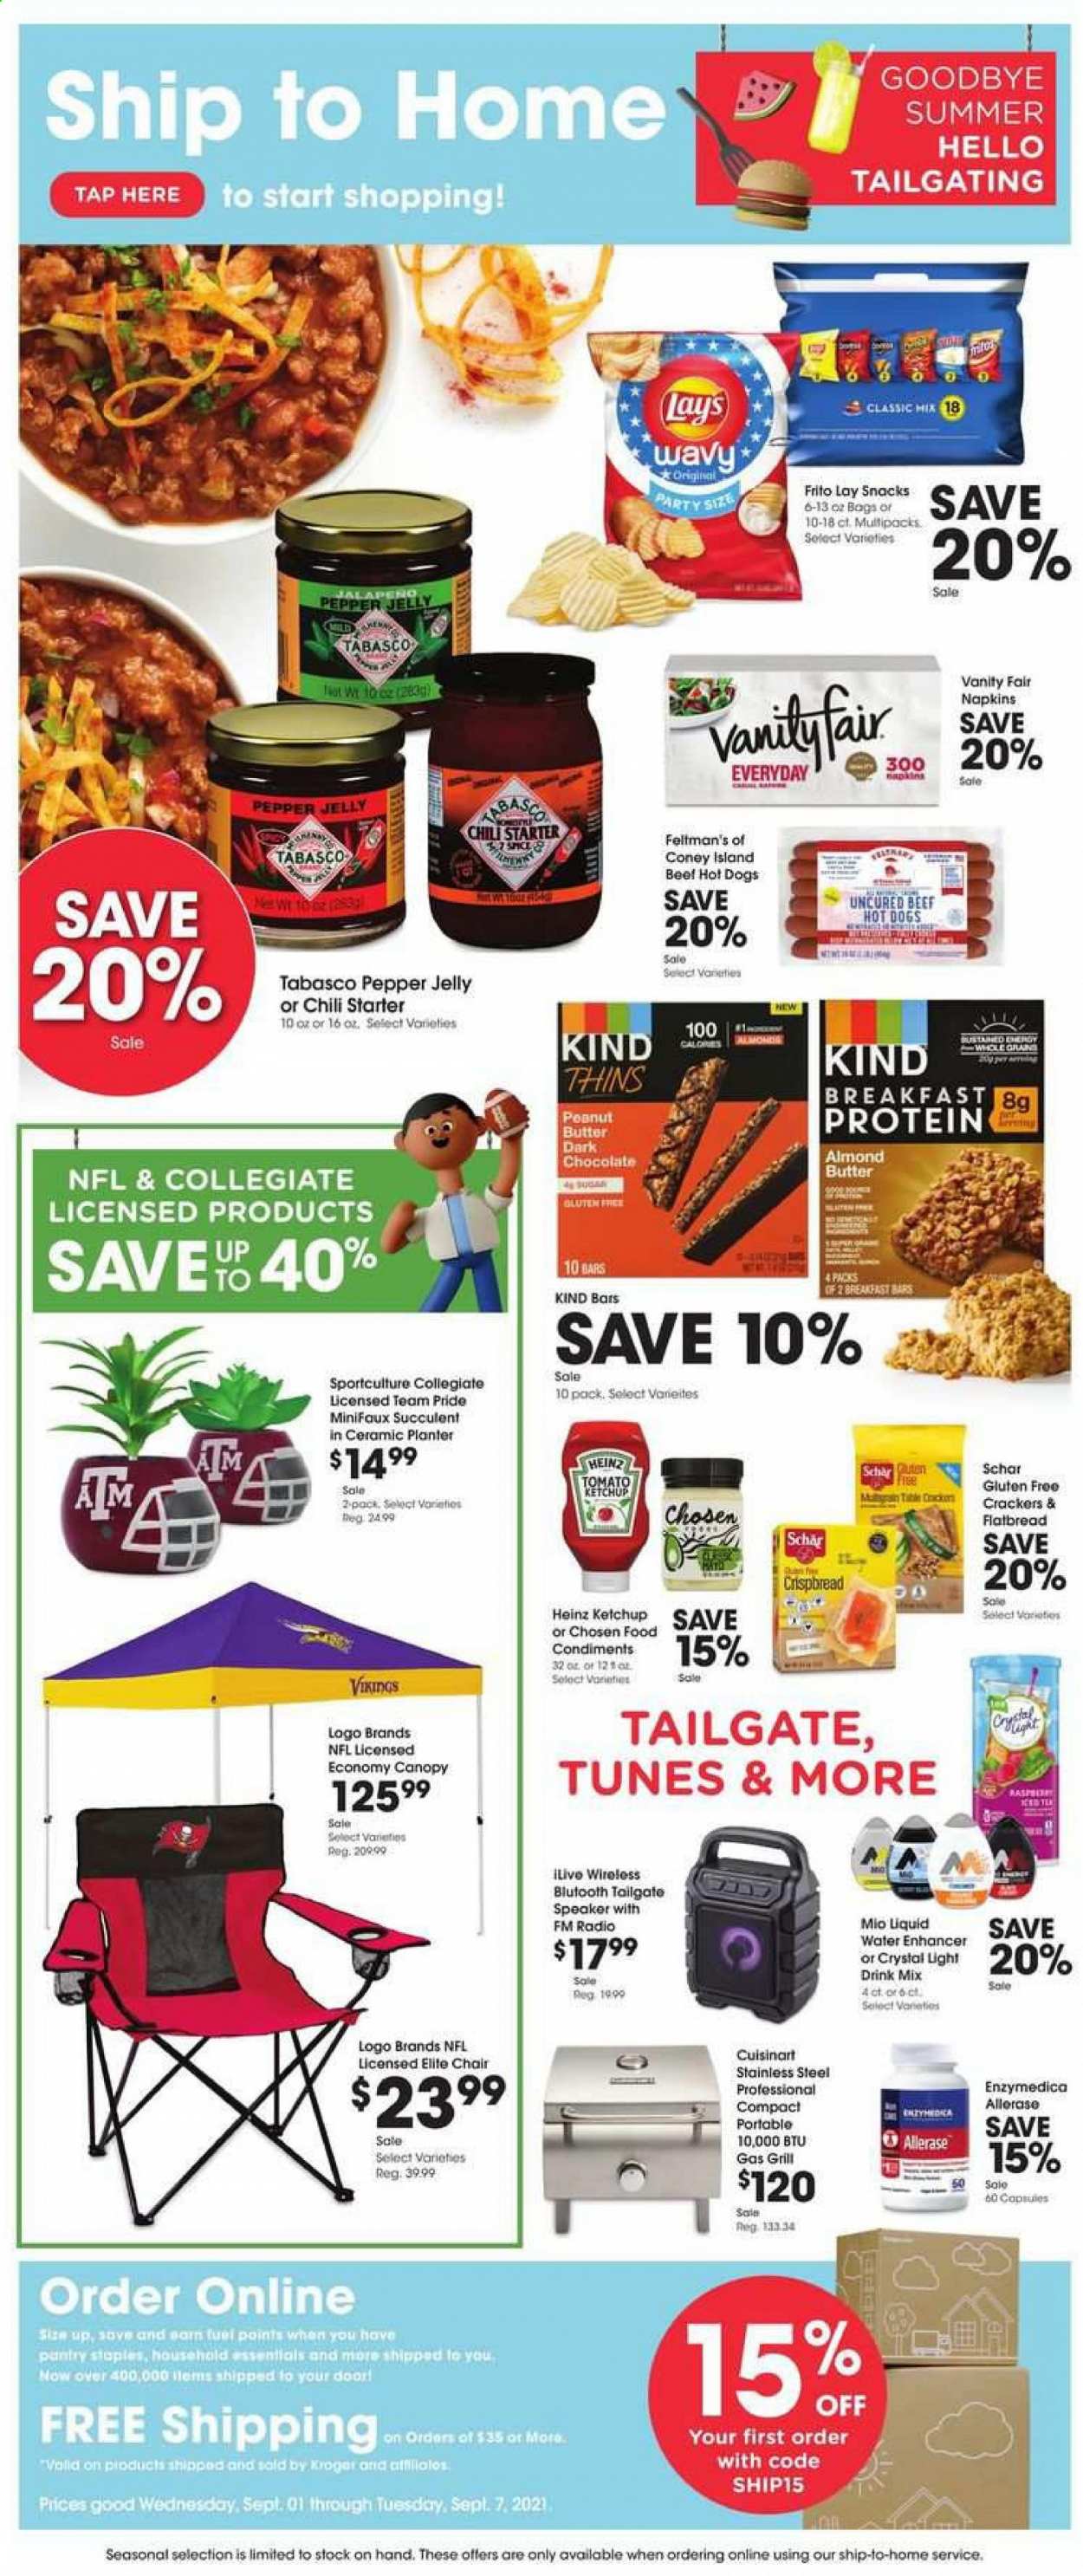 thumbnail - Baker's Flyer - 09/01/2021 - 09/07/2021 - Sales products - flatbread, crispbread, hot dog, almond butter, chocolate, snack, jelly, crackers, dark chocolate, Lay’s, Thins, tabasco, Heinz, pepper, ketchup, peanut butter, napkins, Cuisinart, radio, speaker, chair, gas grill, grill, succulent, starter. Page 1.